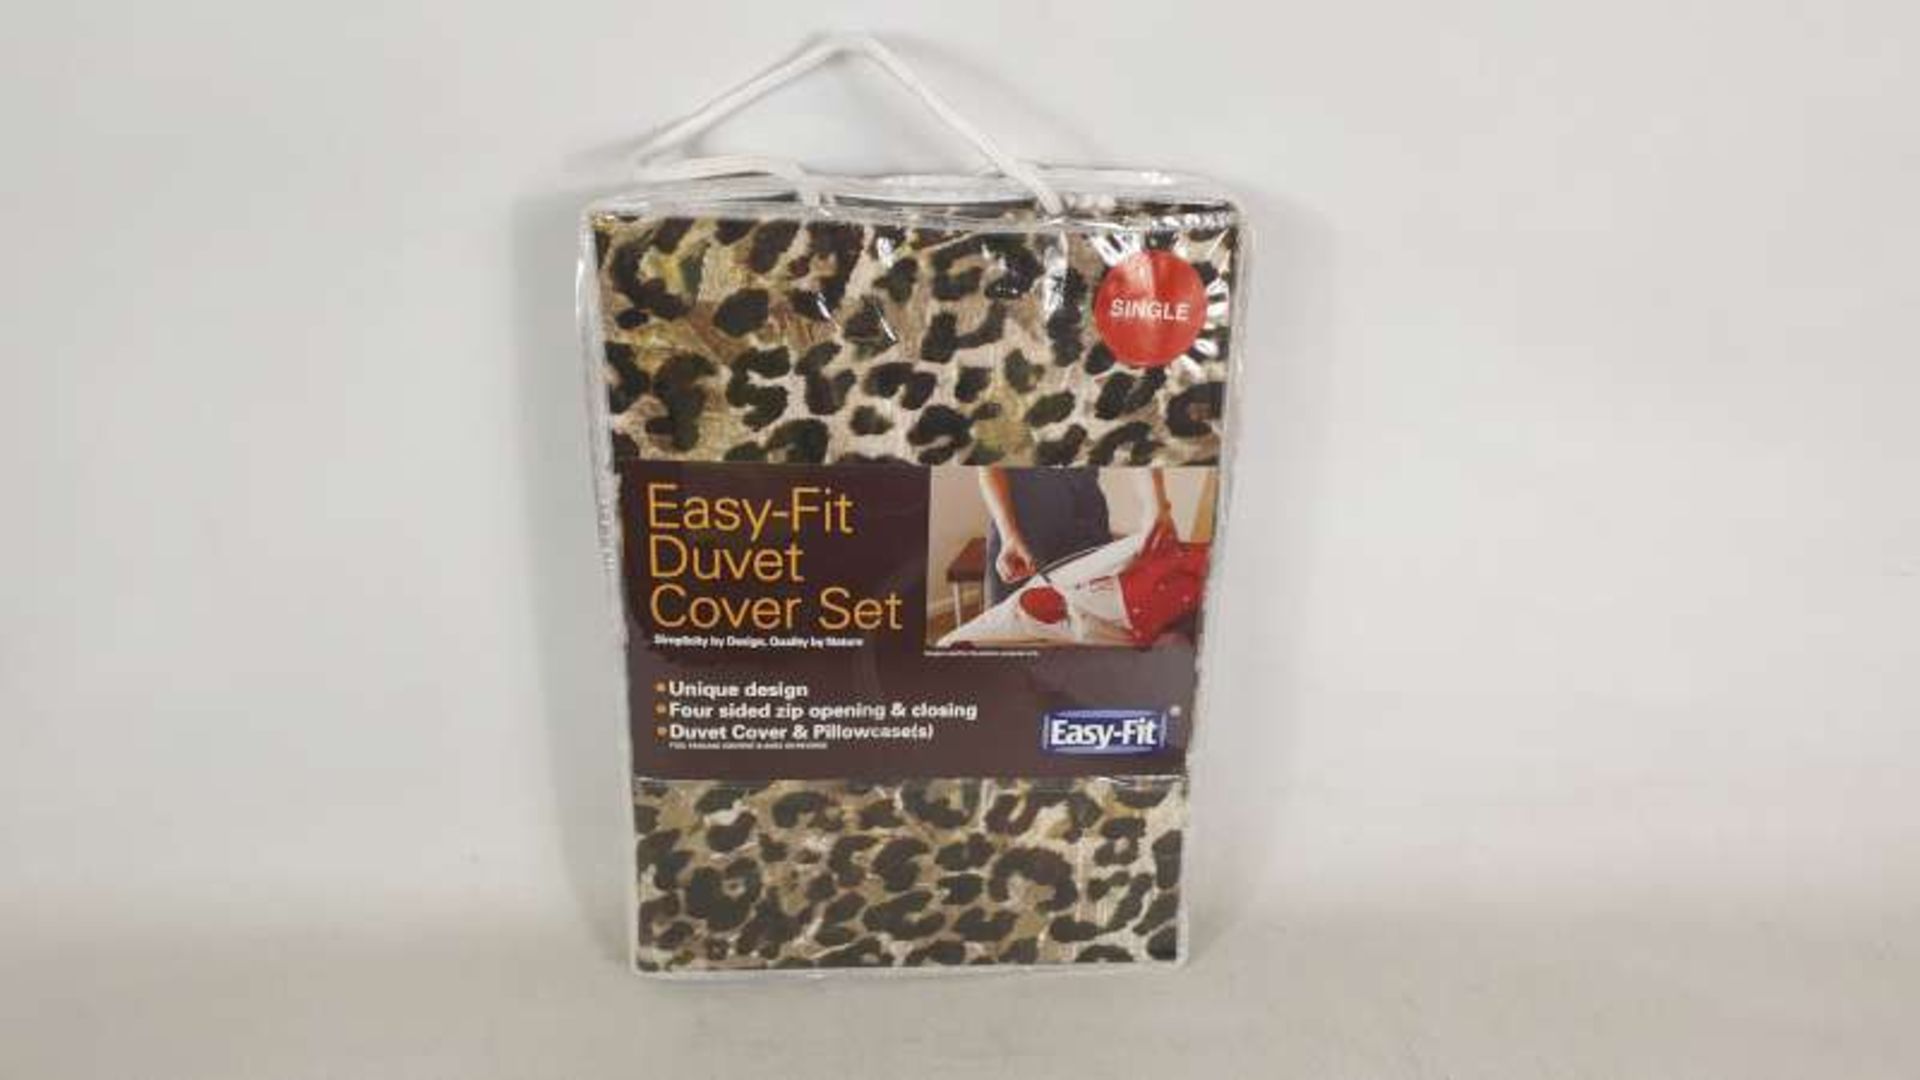 6 X BRAND NEW SINGLE EASY FIT DUVET COVER SETS WITH LEOPARD PRINT DETAIL